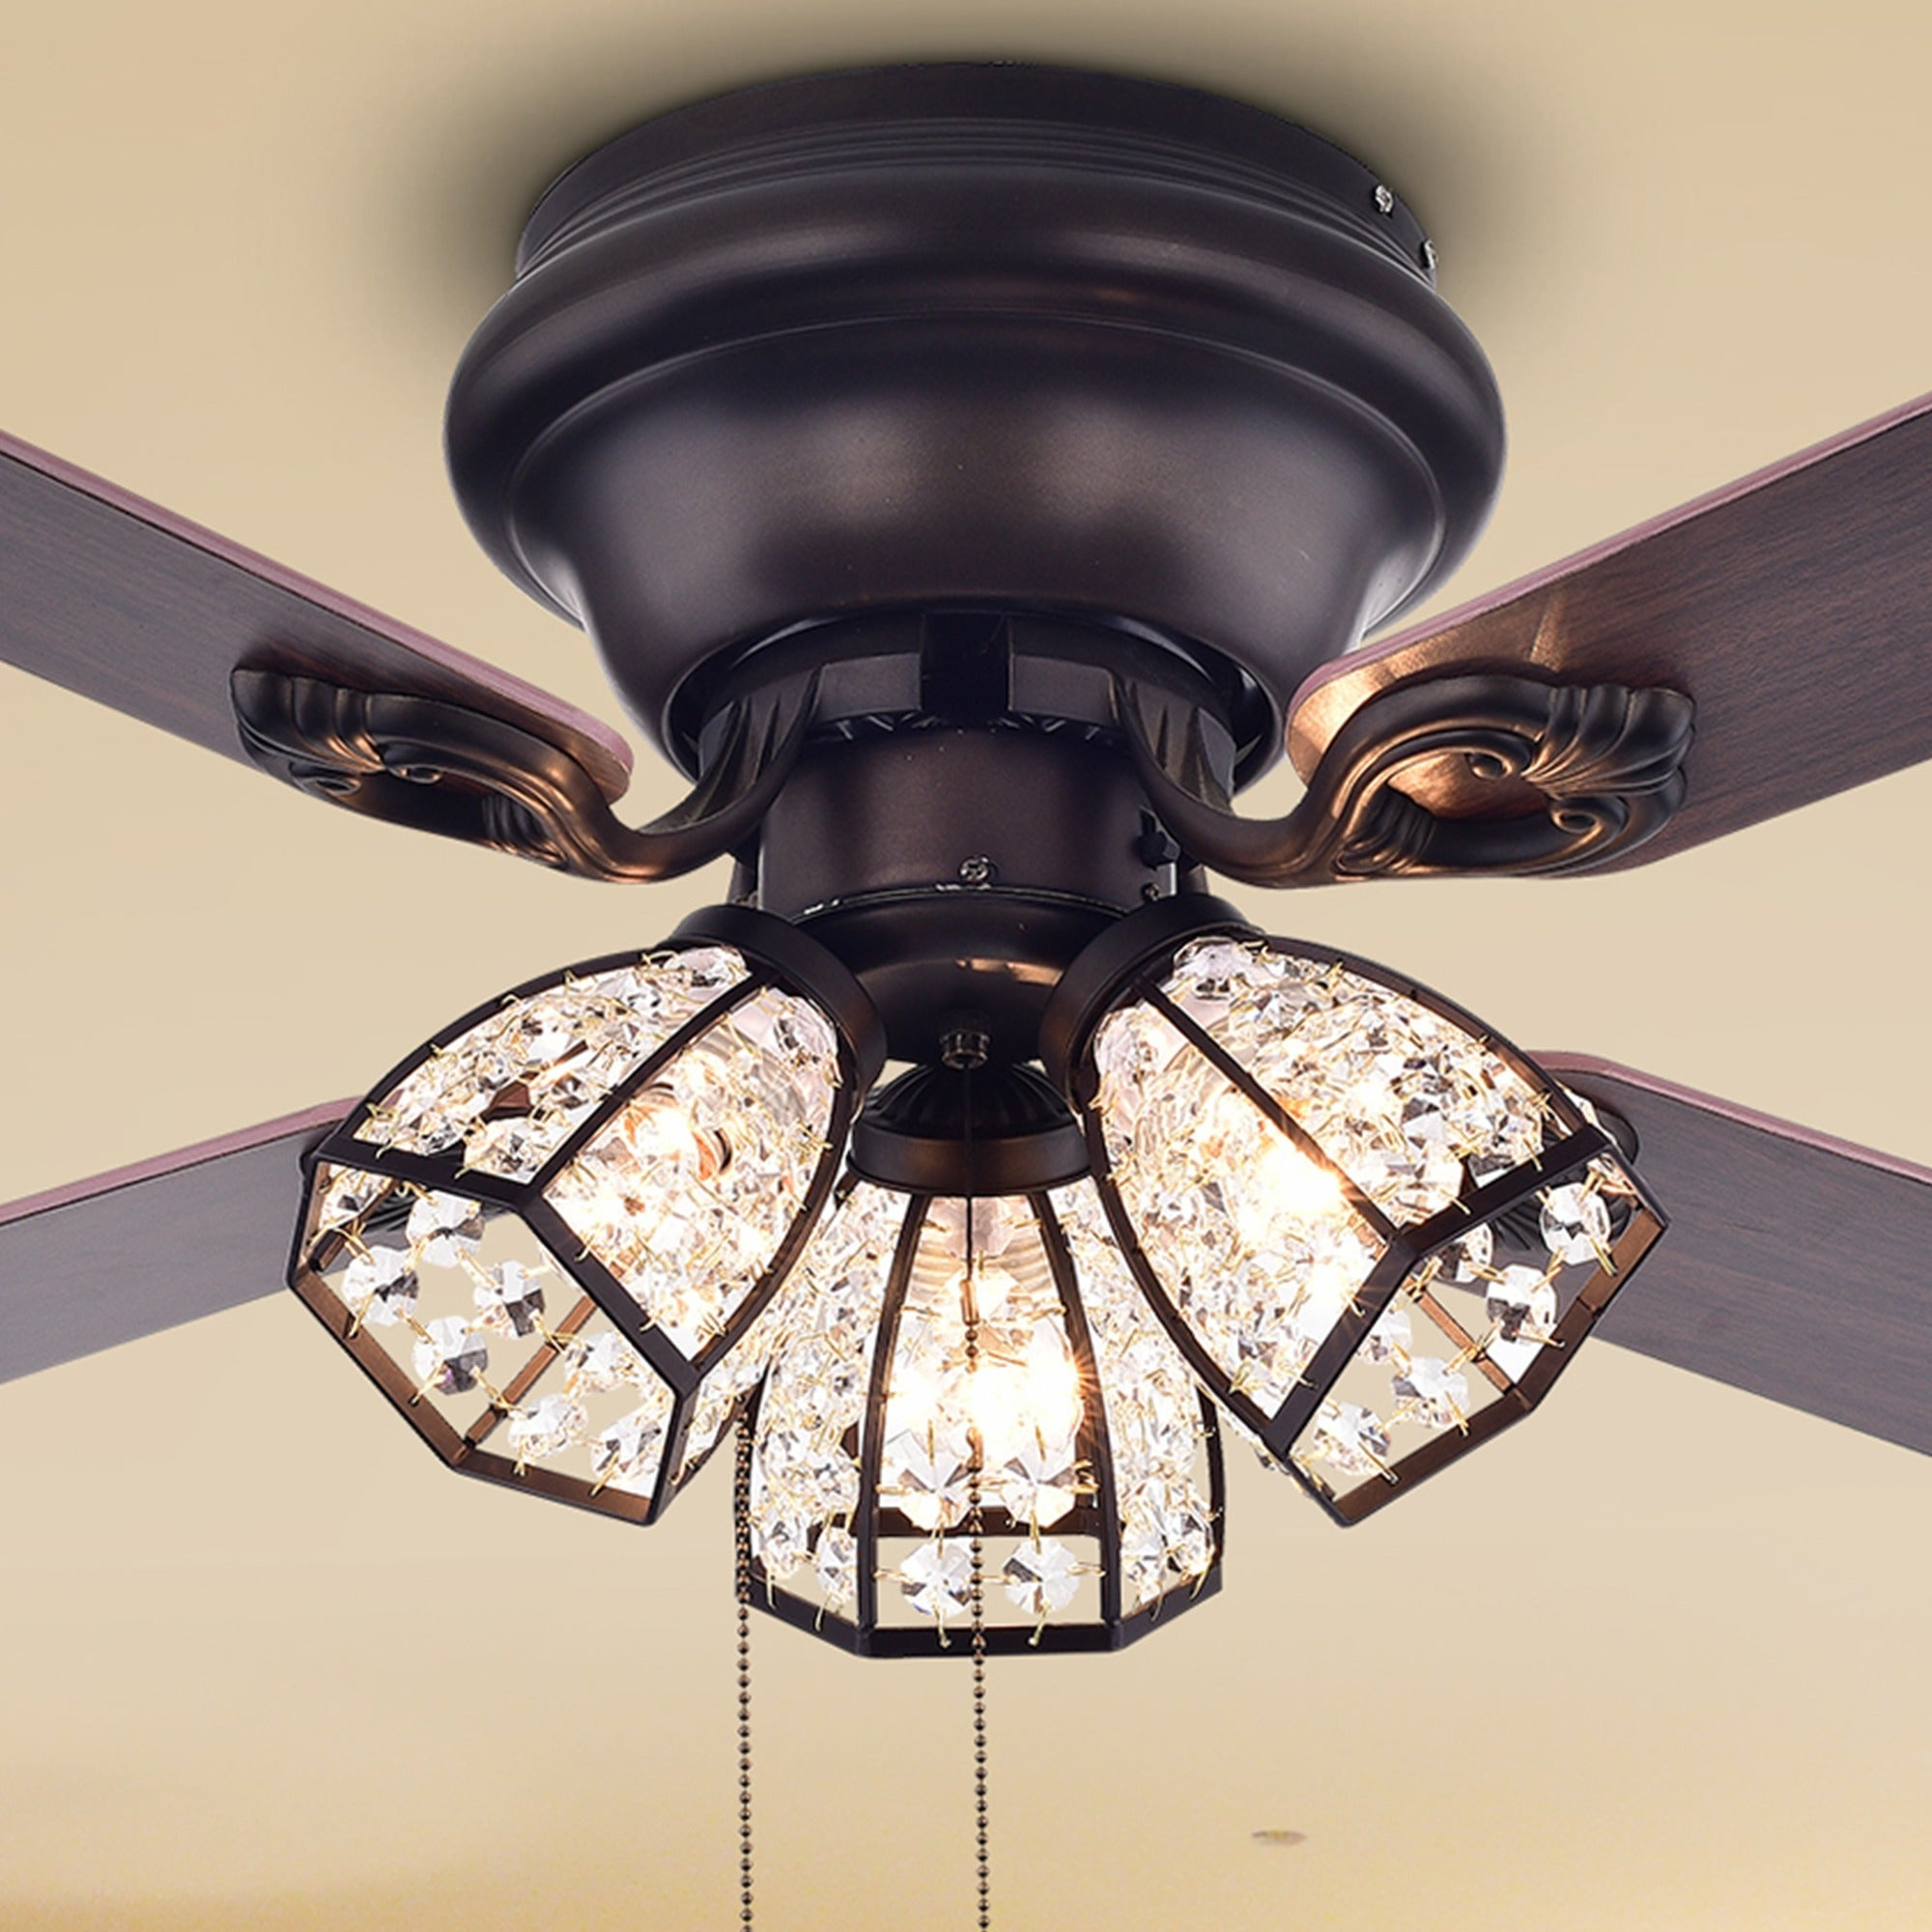 Tarudor Antique Bronze 42 Inch 3 Light 4 Blade Lighted Ceiling Fan Crystal Shades 2 Color Blades Optional Remote pertaining to size 2000 X 2000